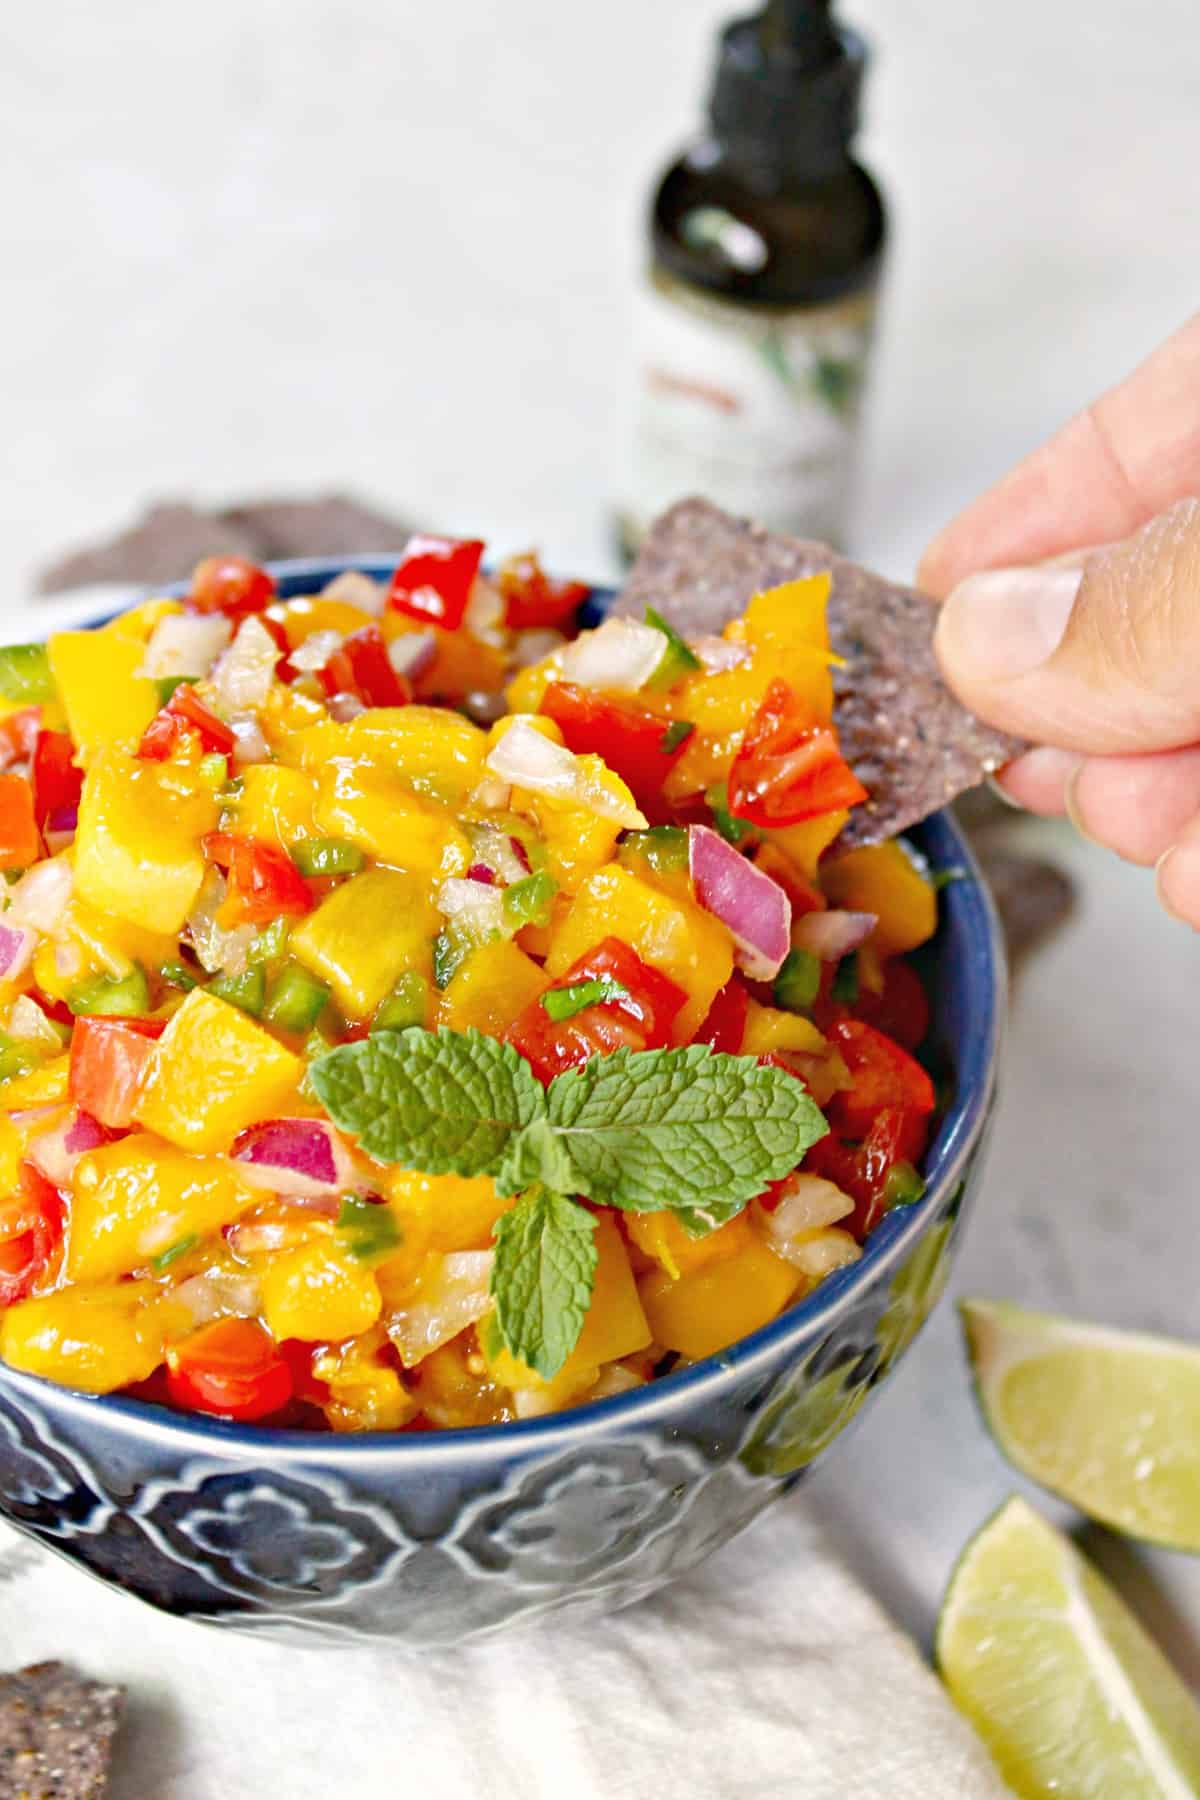 Mango mint salsa is the perfect refreshing topping for chicken, fish, or as a simple dip